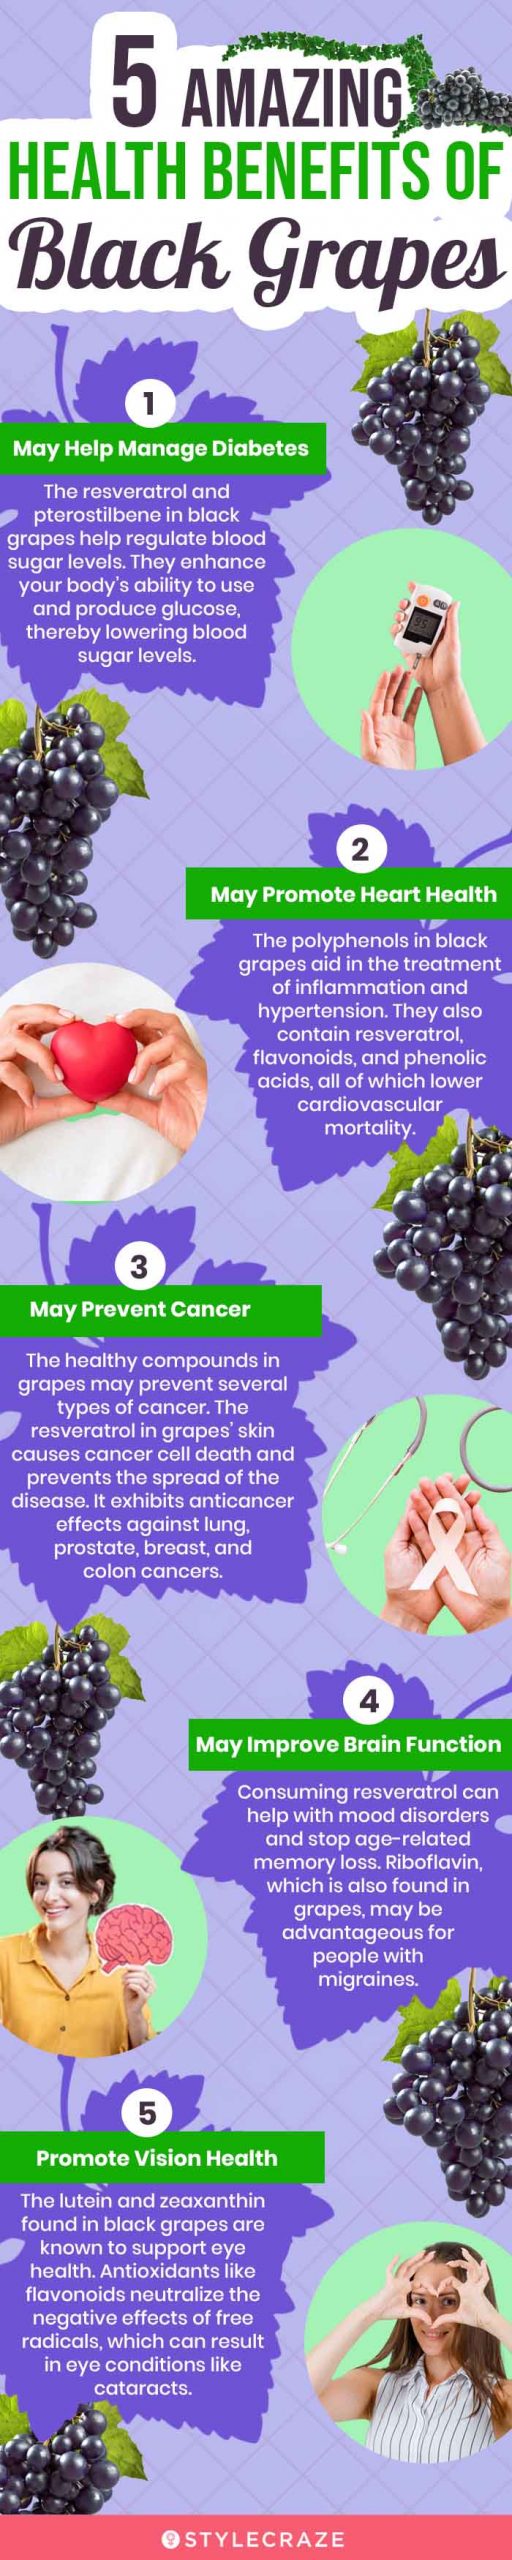 5 amazing health benefits of black grapes (infographic)